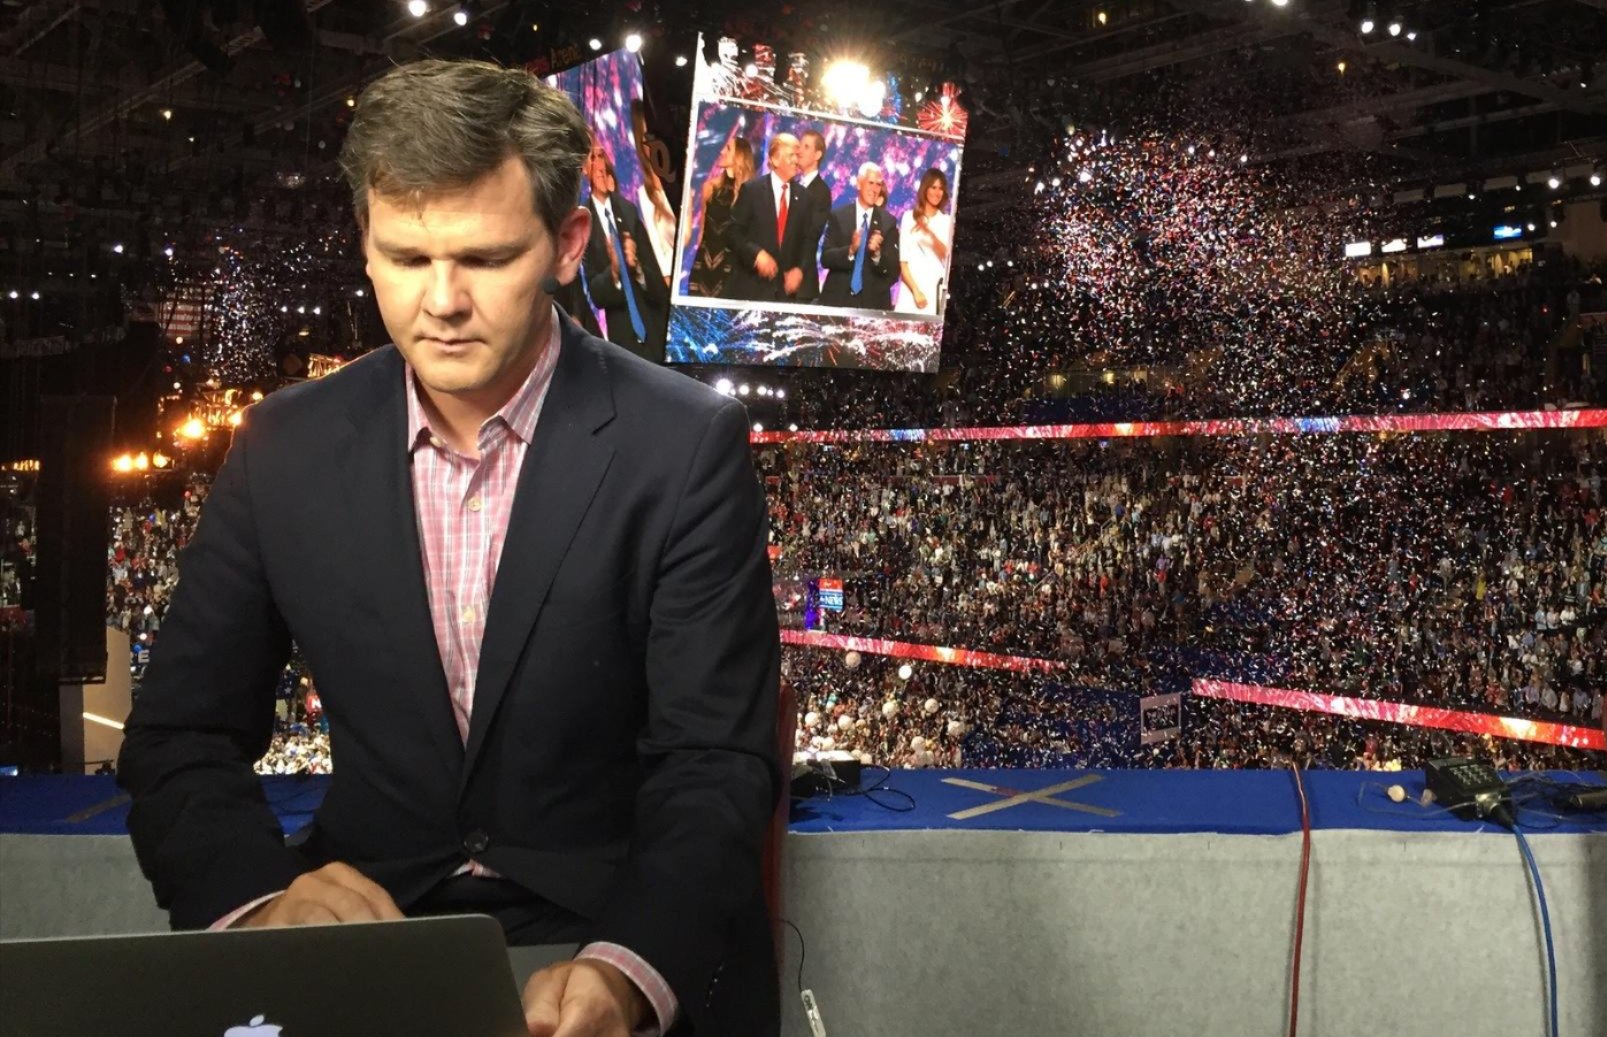 Zach Wolf at the 2016 Republican National Convention